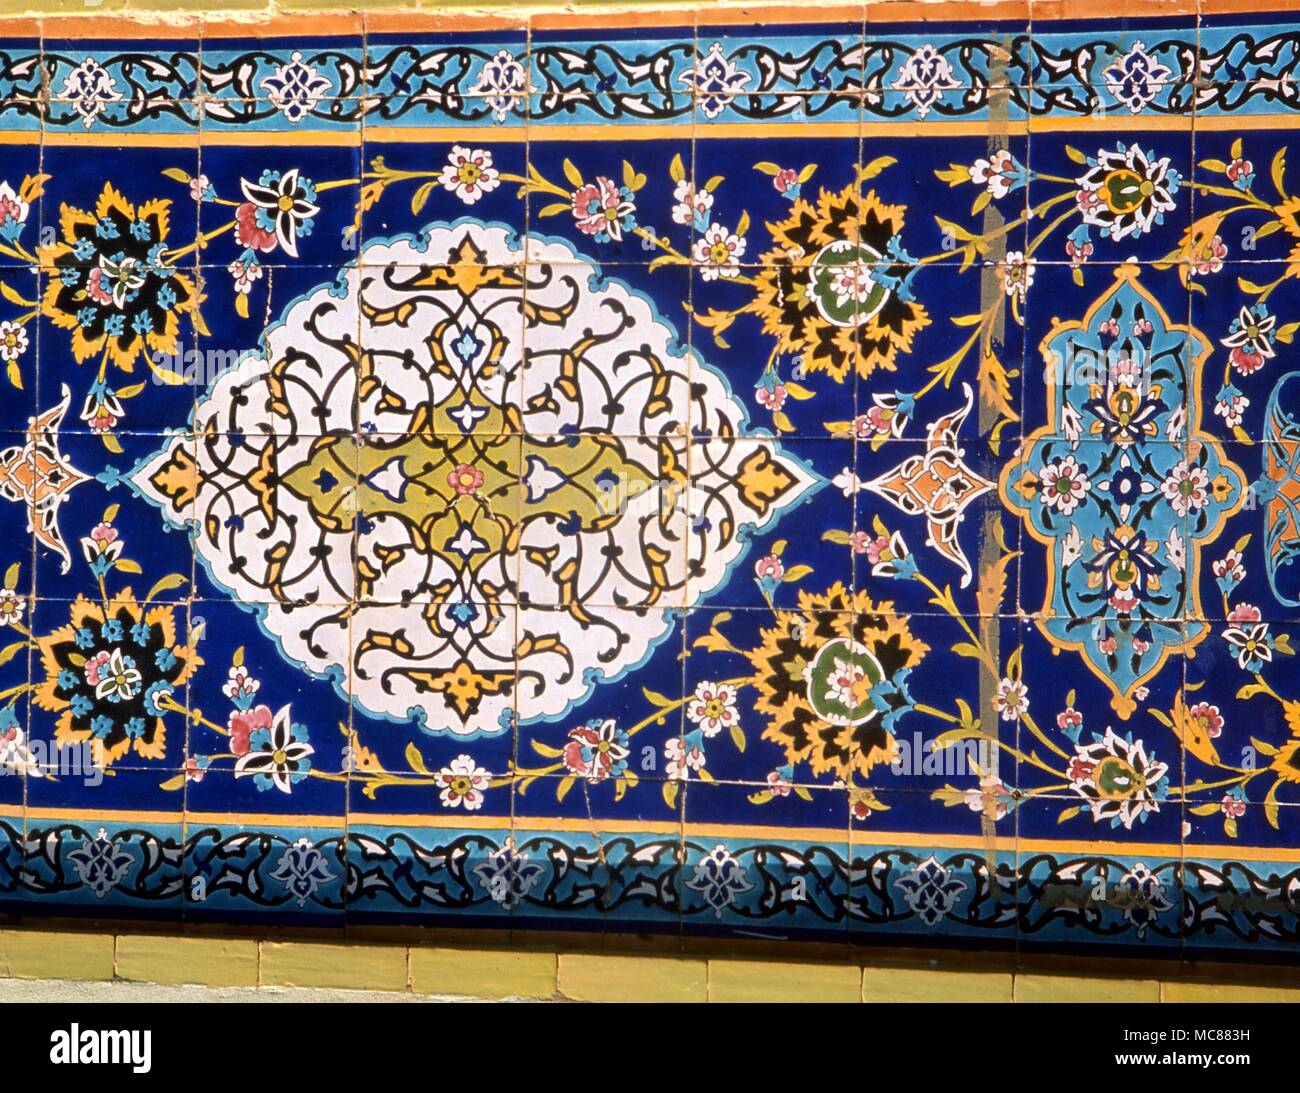 Islam. Tiles in the arabesque style so favoured by Islamic architects. Sample tiles from the outside of a mosque in Kuwait. Stock Photo